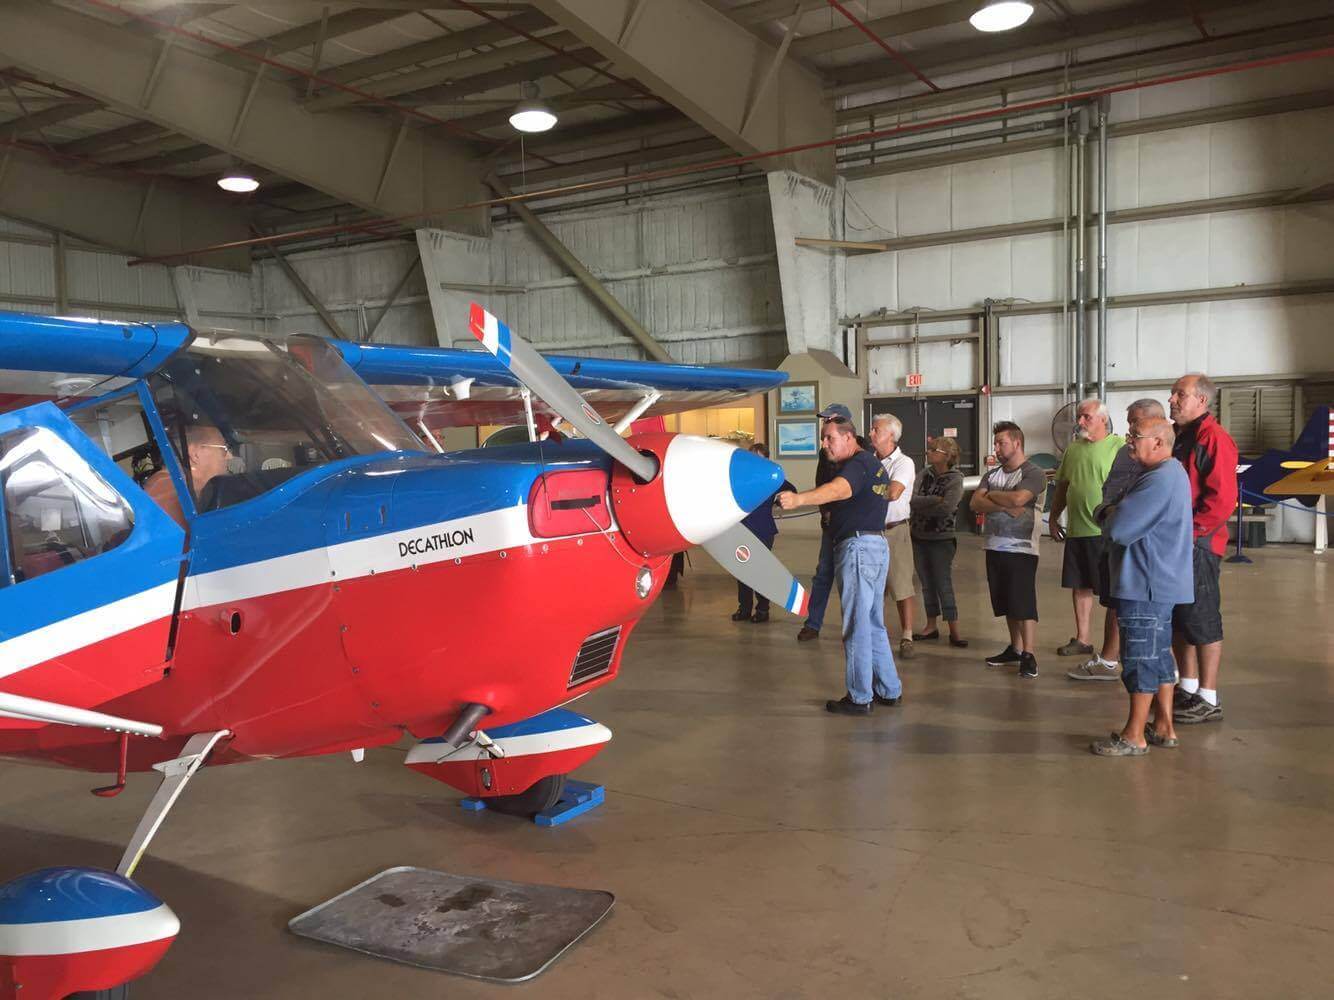 People Viewing a Vintage Plane at Wings Over Miami Museum in Miami Florida